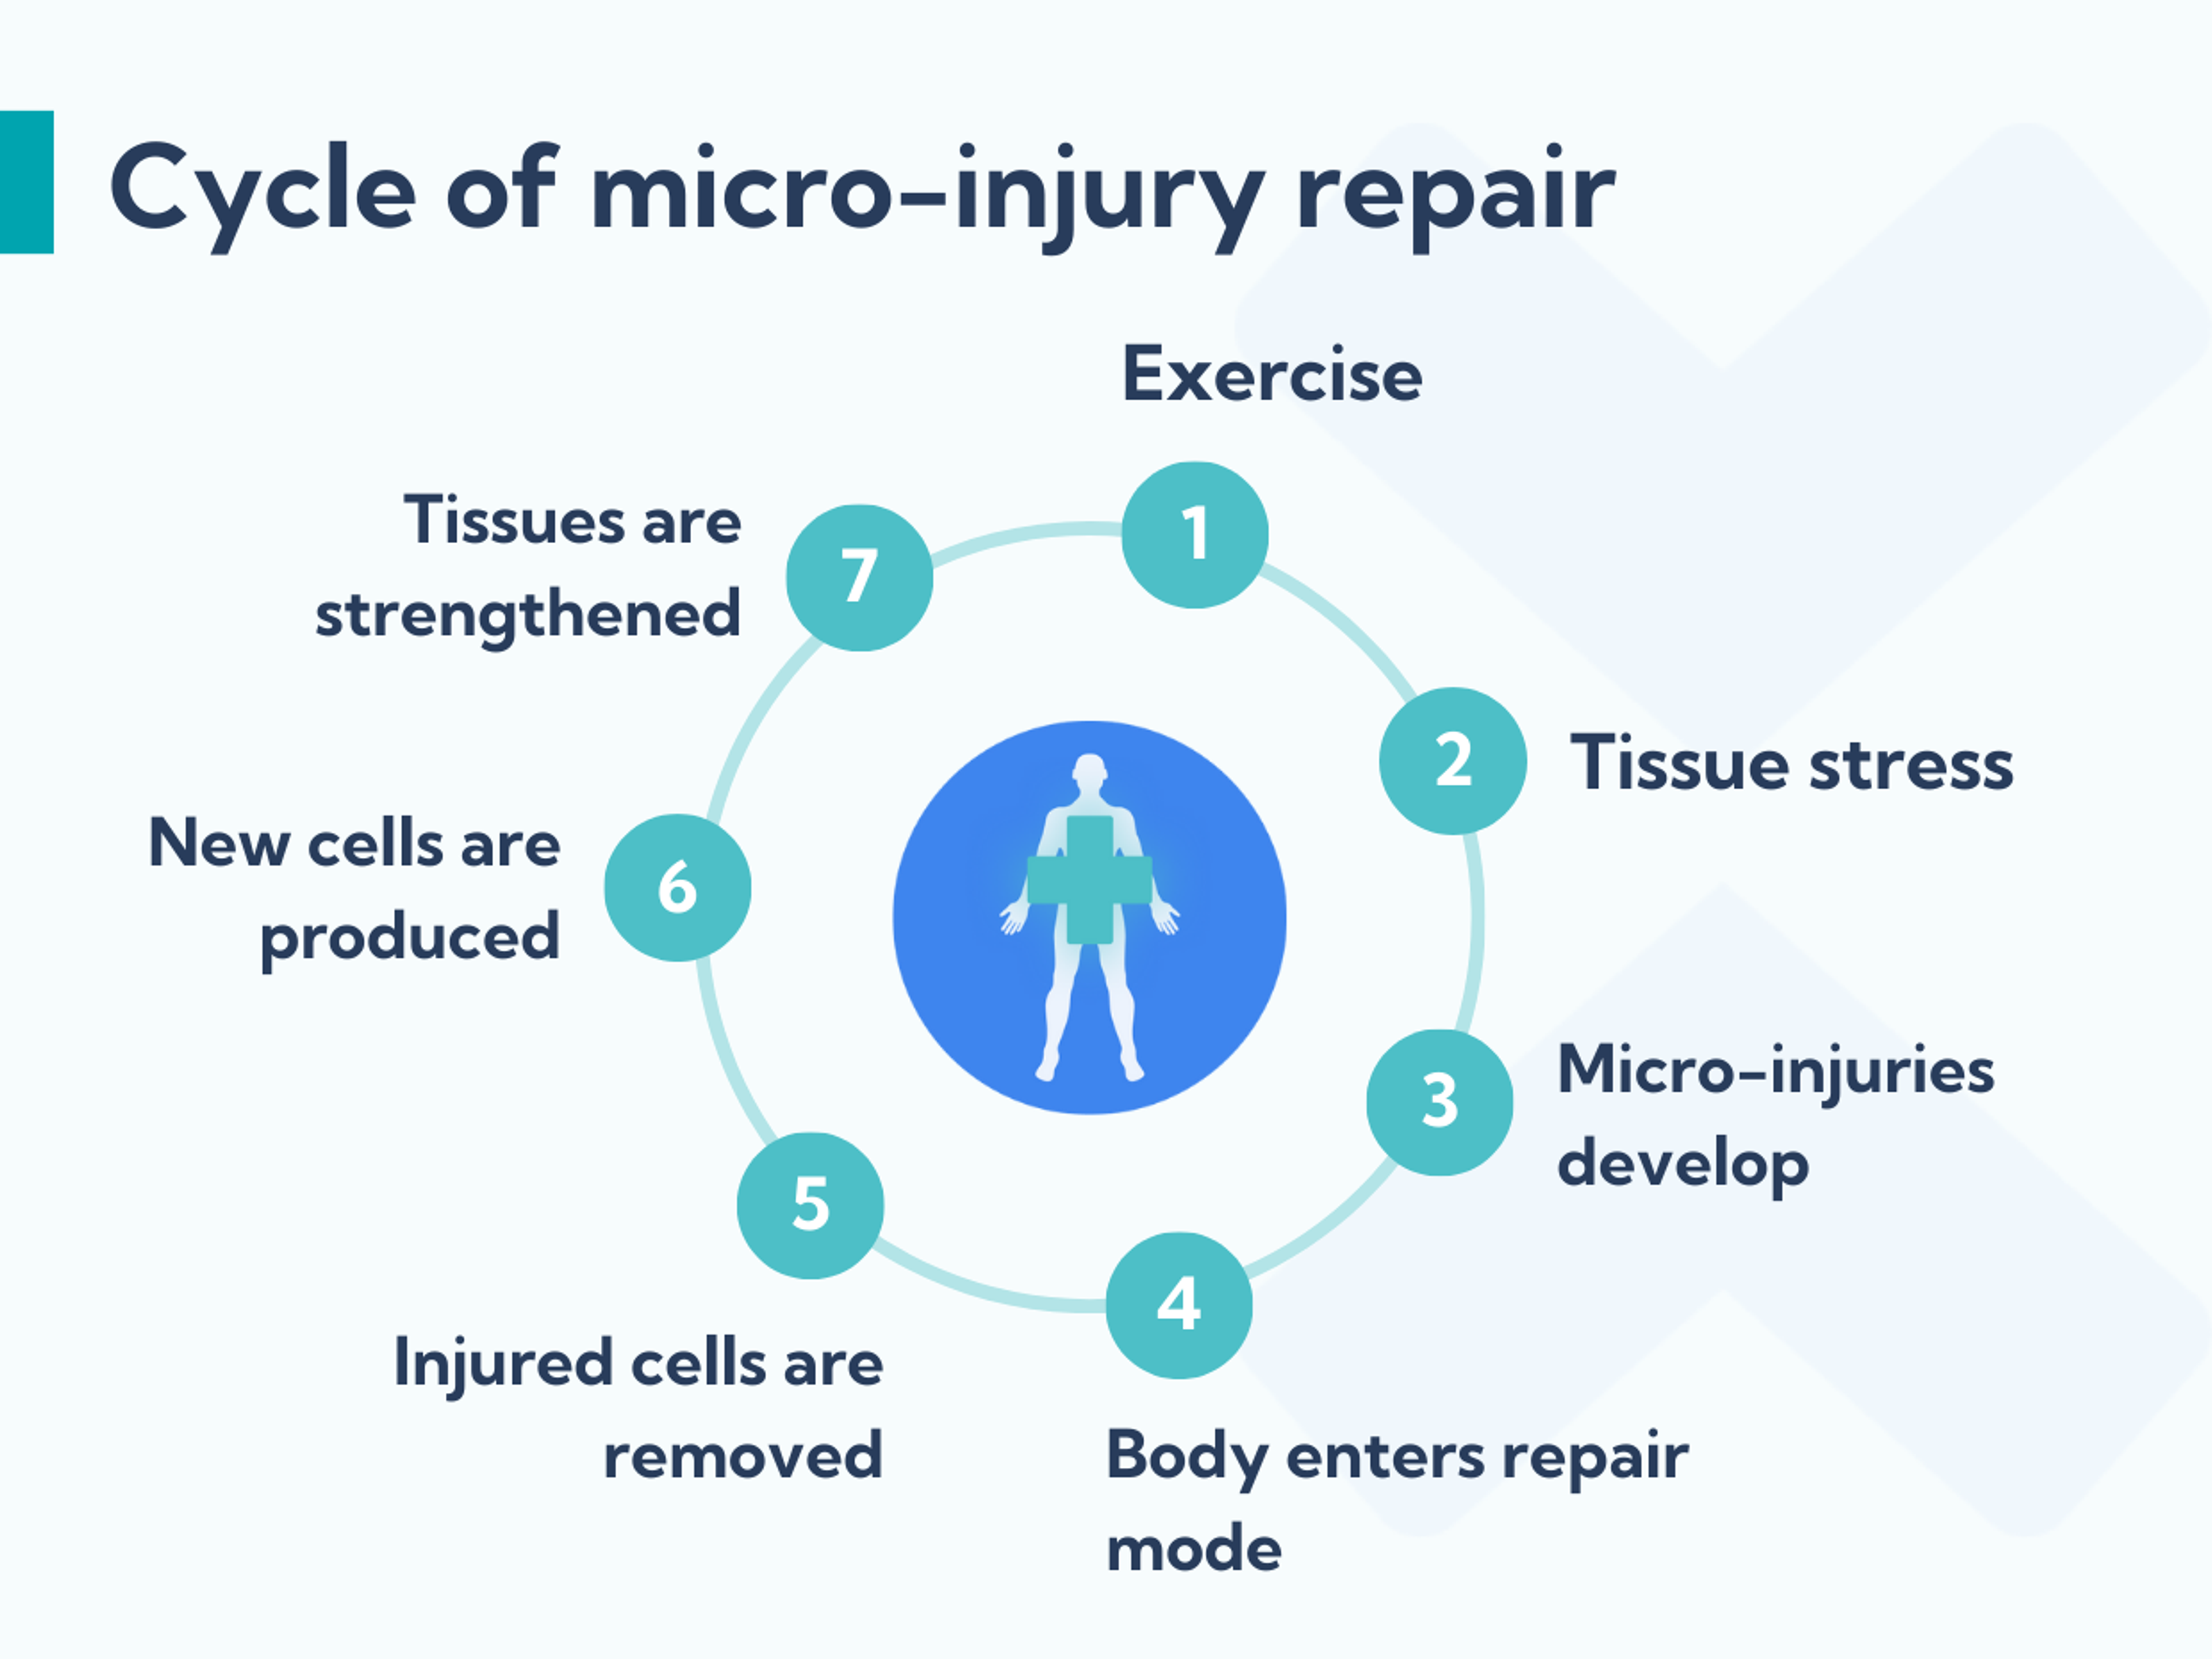 Our bodies use the recovery period after exercise (including rehab exercises) to repair and strengthen our tissues. You risk worsening your injury if you don't allow the full recovery cycle to complete before training again.